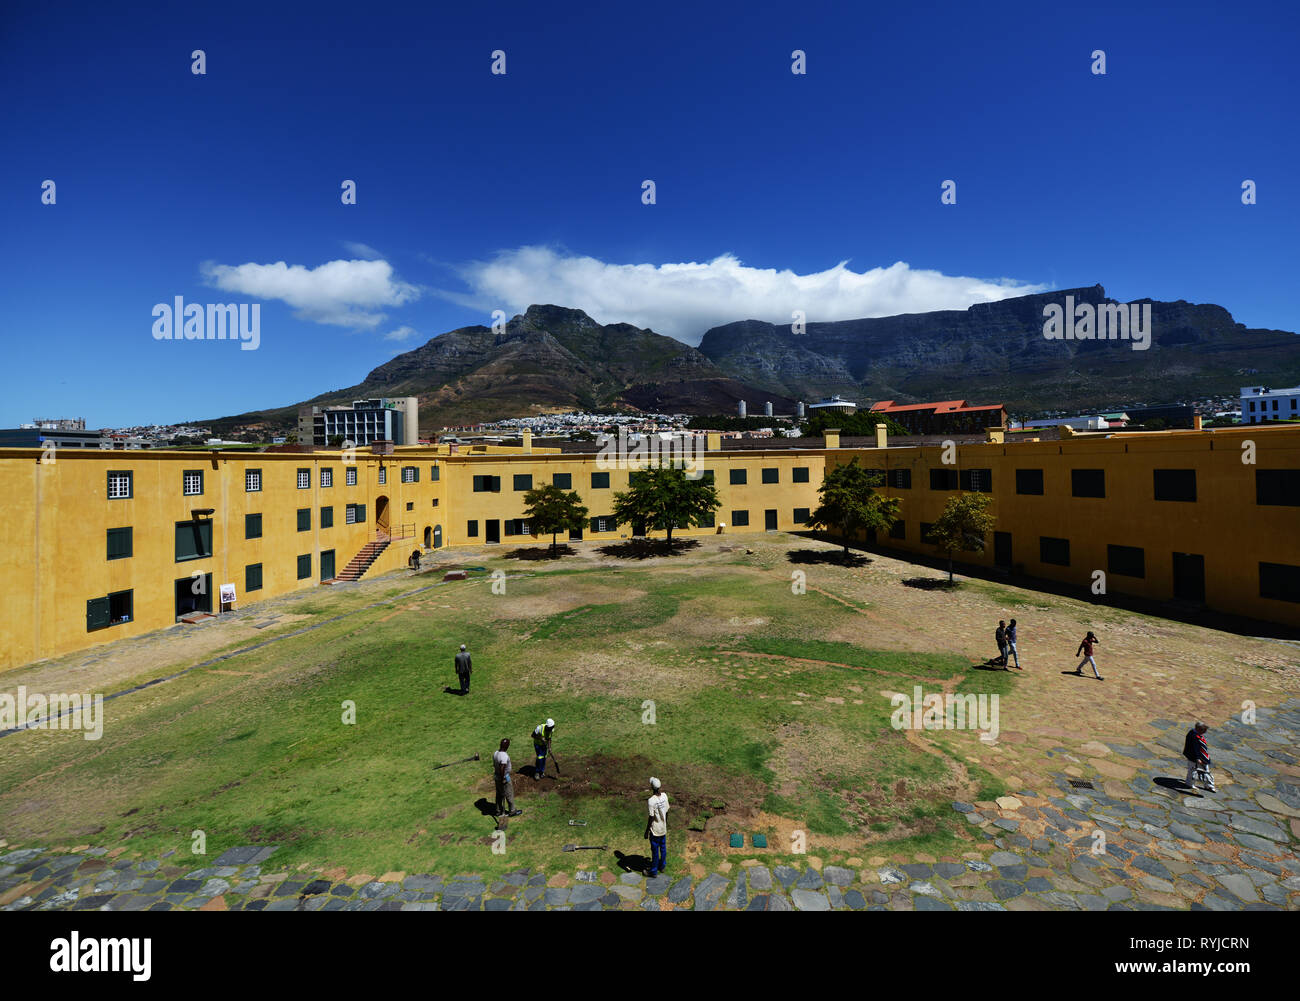 The Castle of good hope in Cape Town, South Africa. Stock Photo